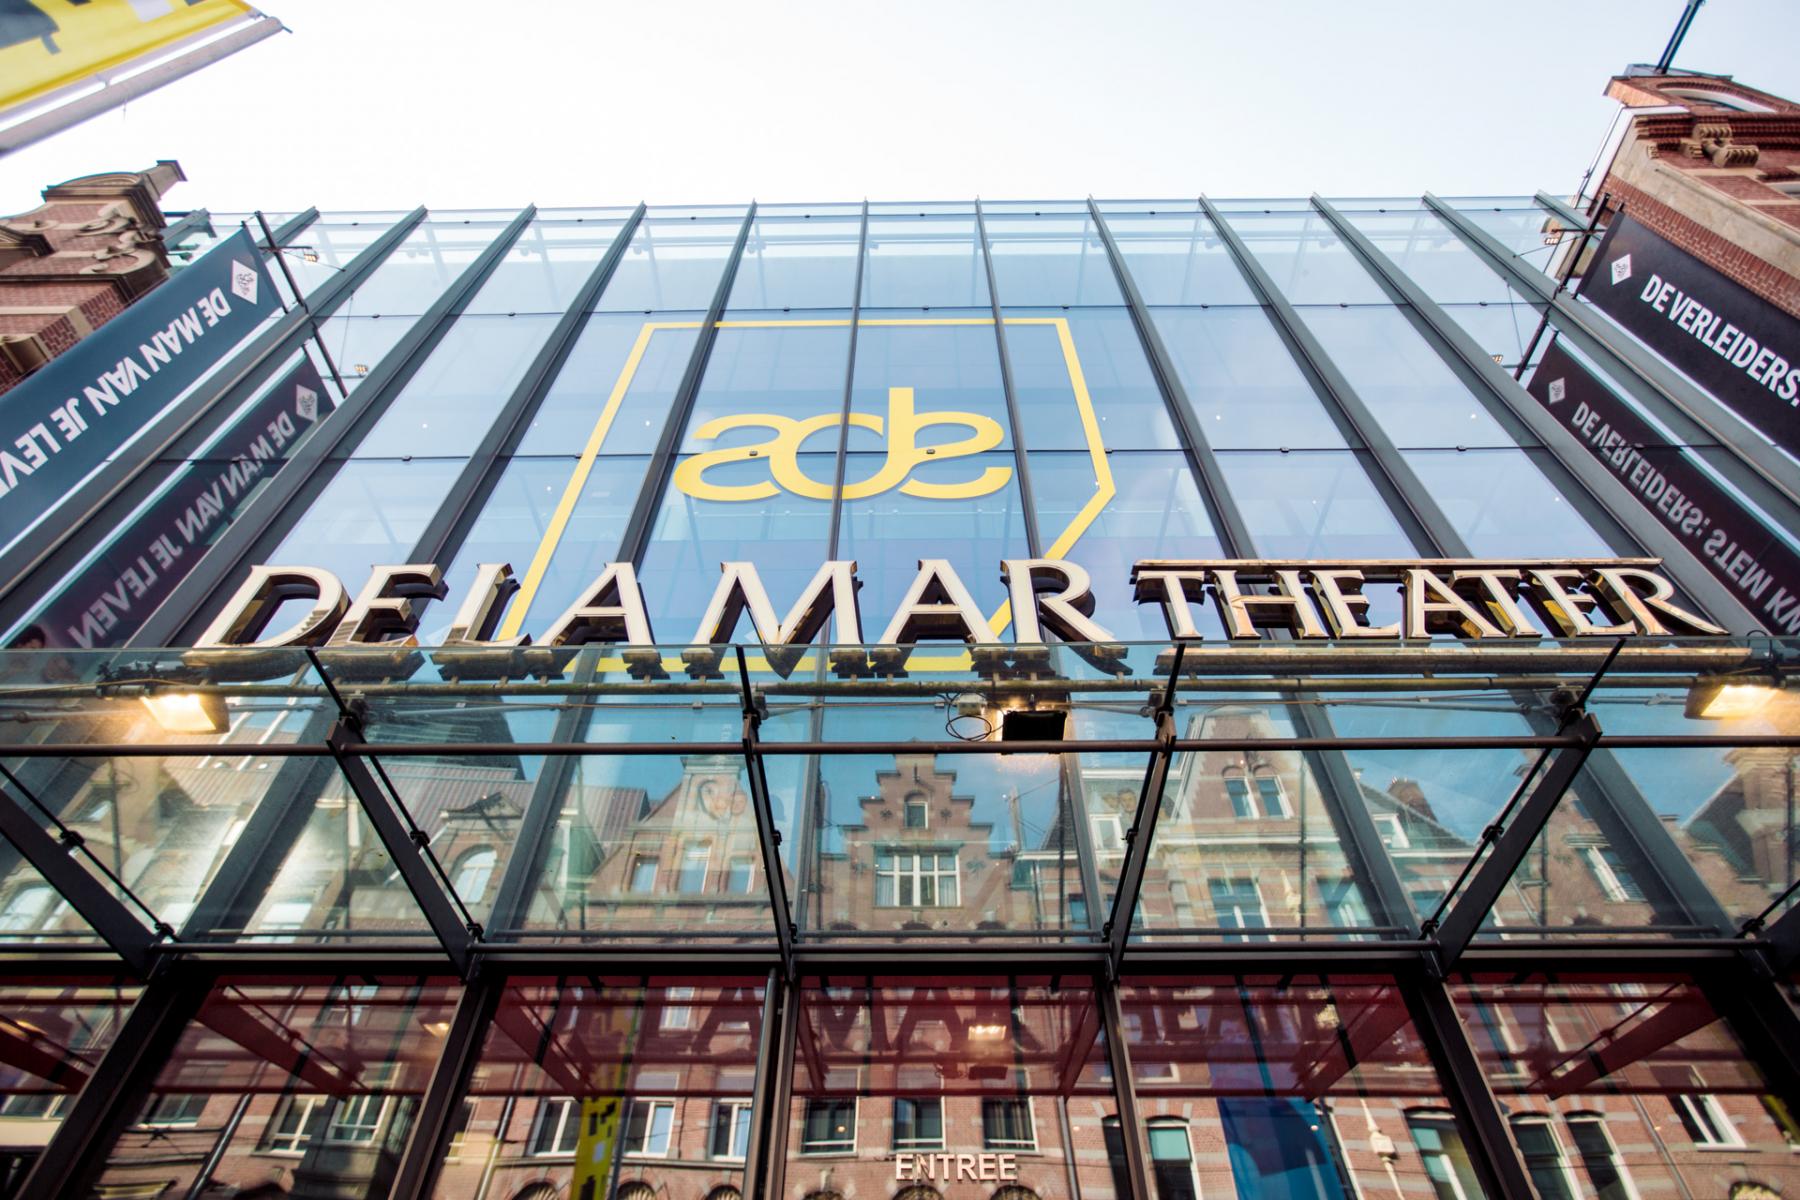 Amsterdam Dance Event ADE 2018 conference